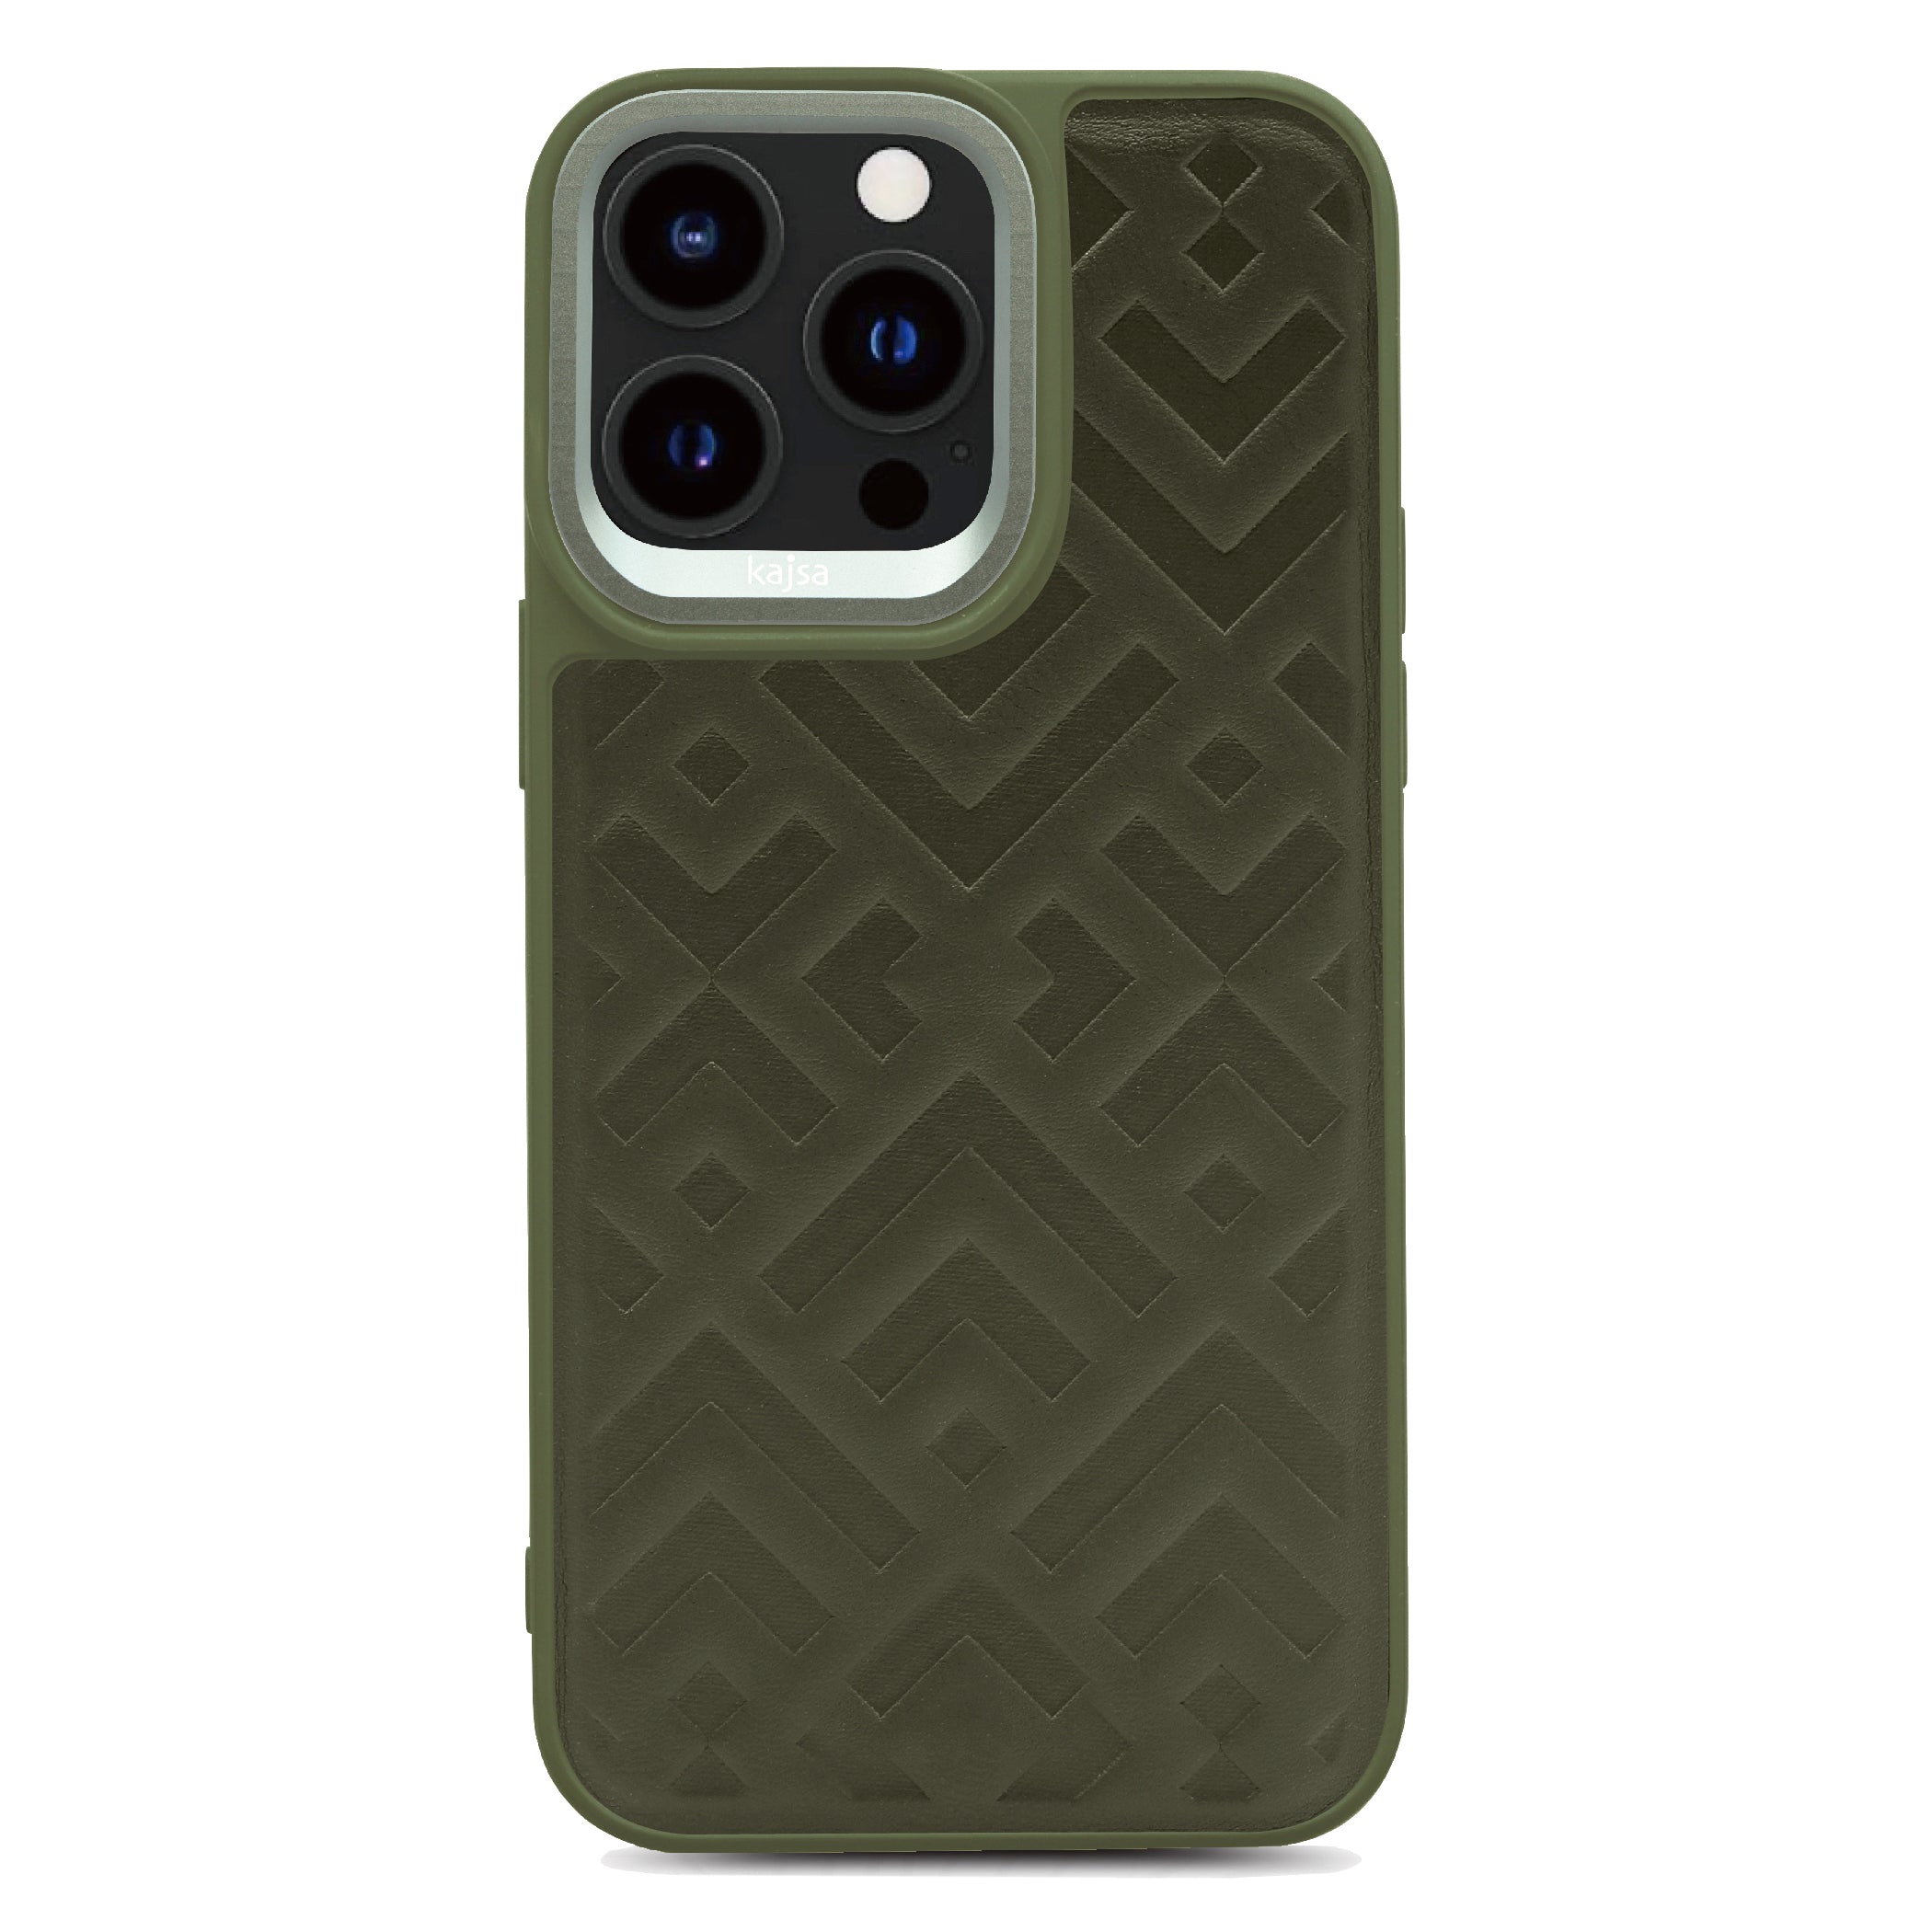 Briquette Collection - Rhombus Back Case for iPhone 14-Phone Case- phone case - phone cases- phone cover- iphone cover- iphone case- iphone cases- leather case- leather cases- DIYCASE - custom case - leather cover - hand strap case - croco pattern case - snake pattern case - carbon fiber phone case - phone case brand - unique phone case - high quality - phone case brand - protective case - buy phone case hong kong - online buy phone case - iphone‎手機殼 - 客製化手機殼 - samsung ‎手機殼 - 香港手機殼 - 買電話殼